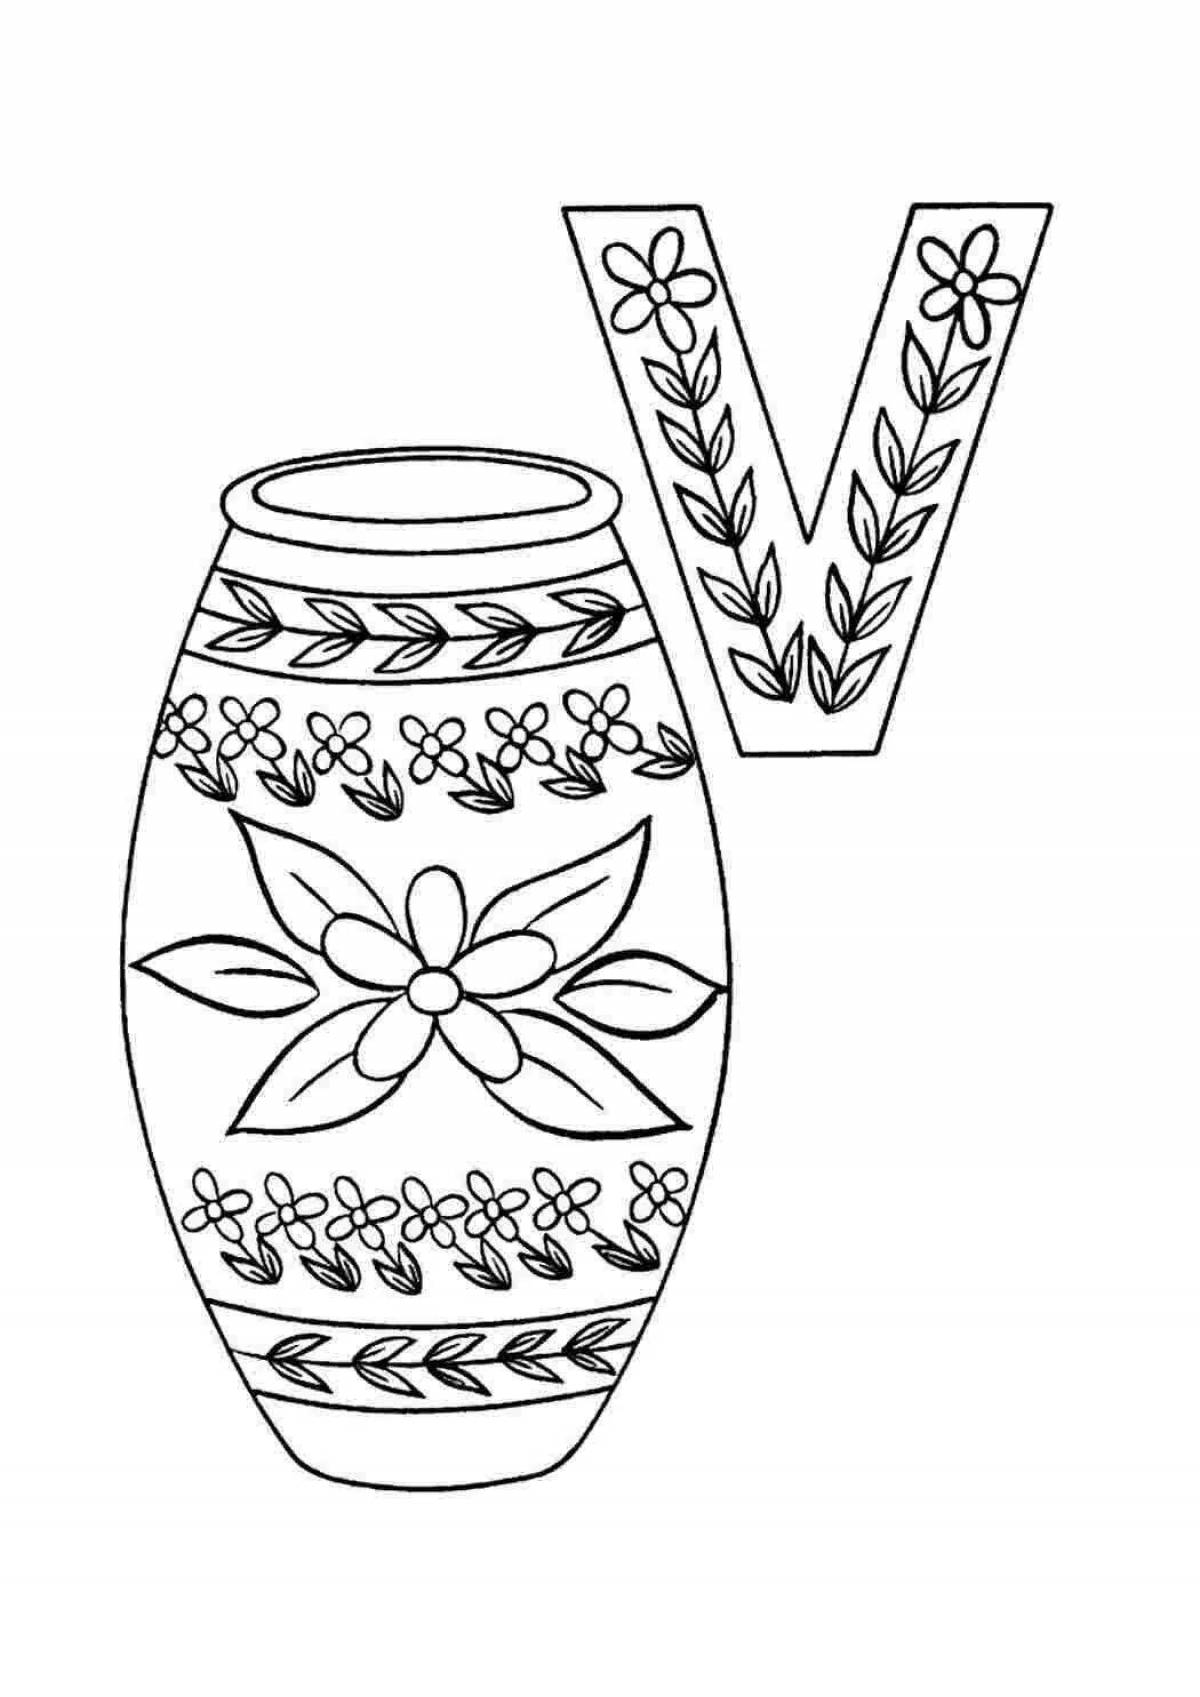 Great coloring vase for beginners